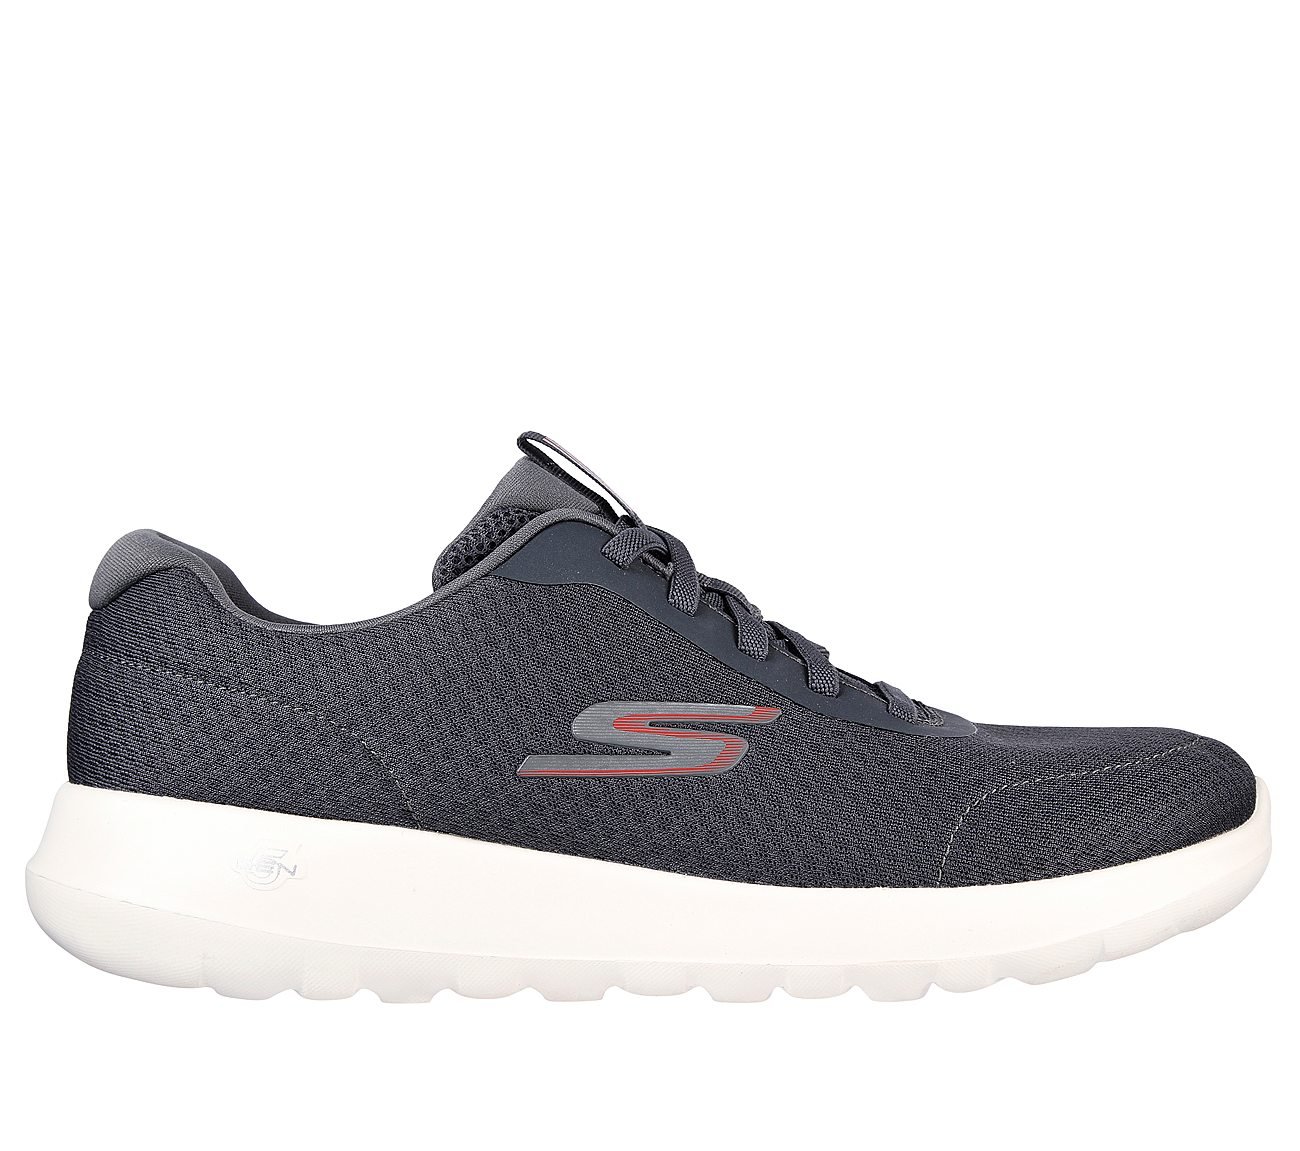 Skechers Charcoal/Red Go Walk Max Midshore Lace Up Shoes For Men ...